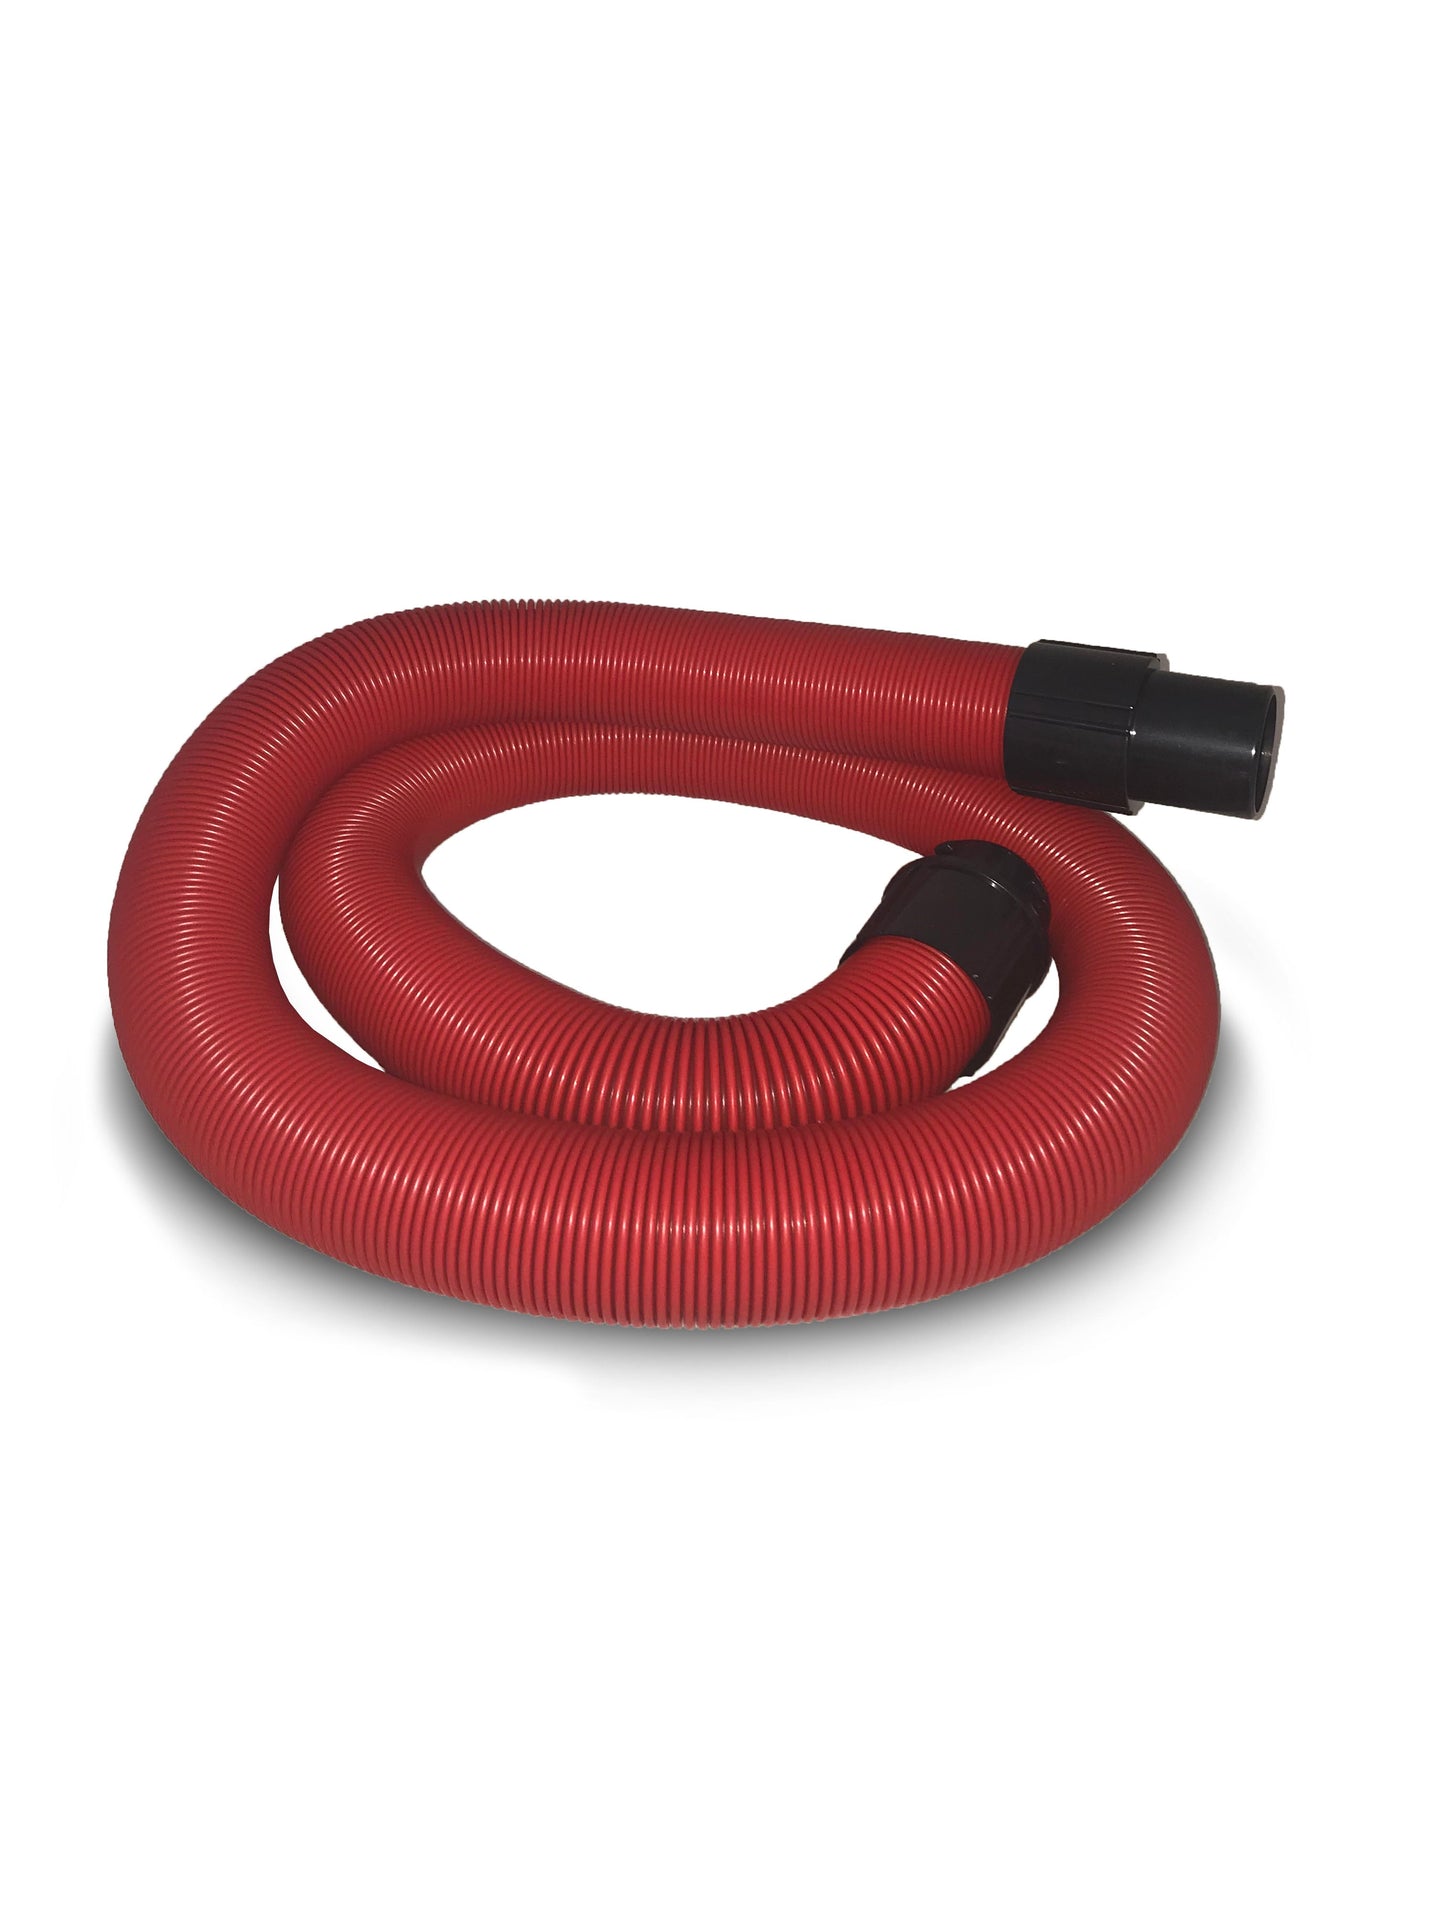 Replacement Hose Bruhl Dryer models MD2800 and MD3200+